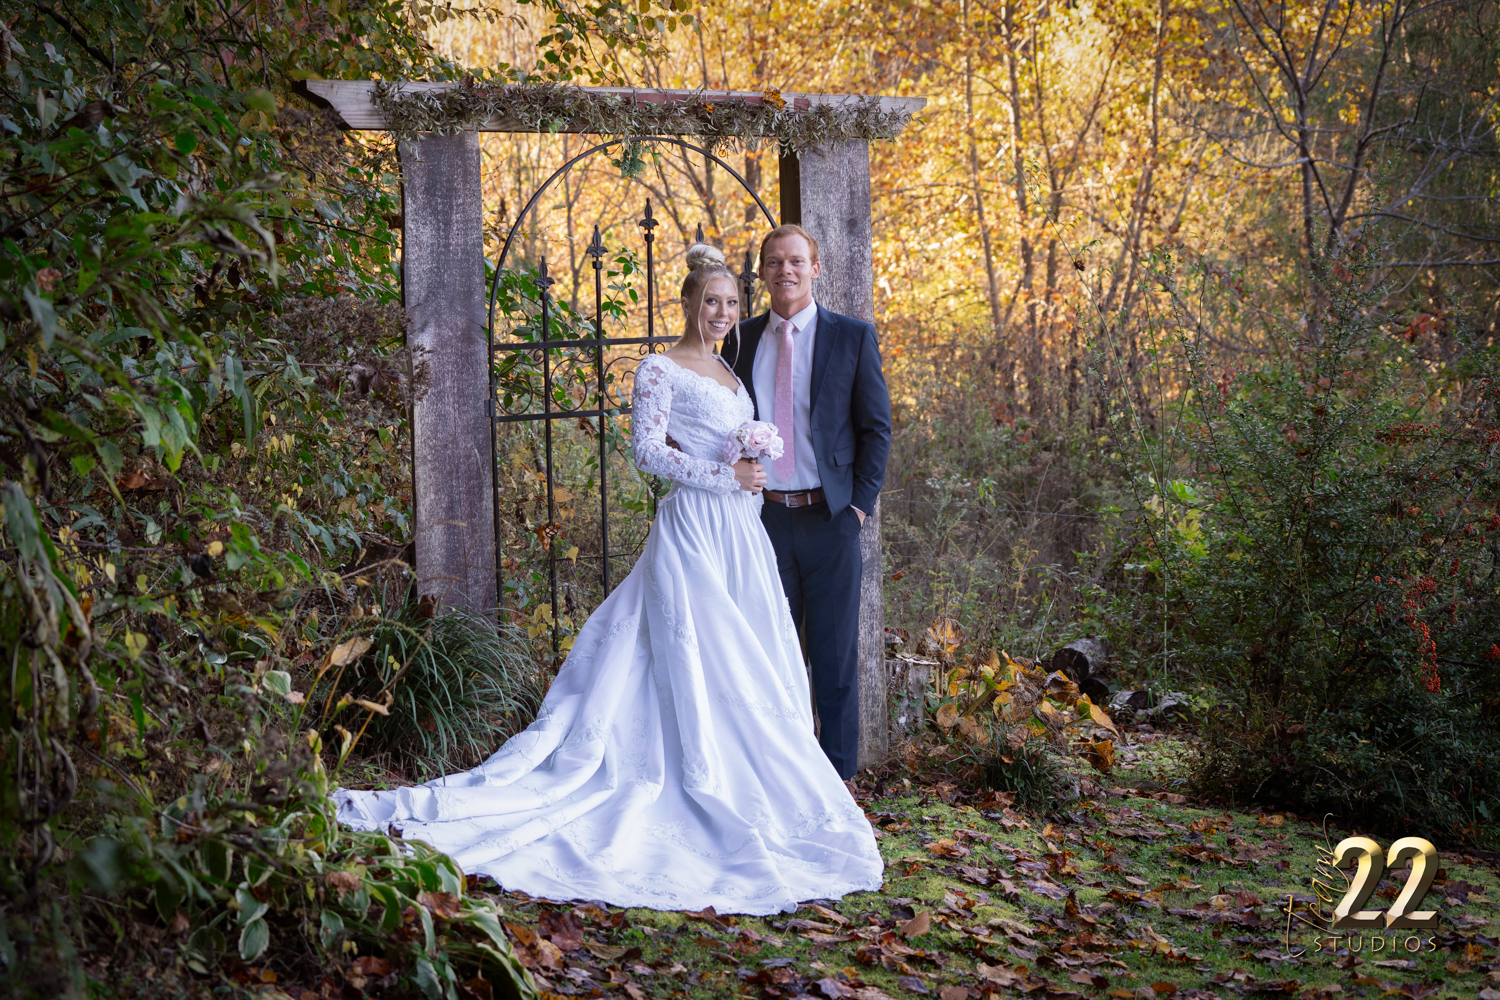 Bride and groom posing at a black iron gate in the fall